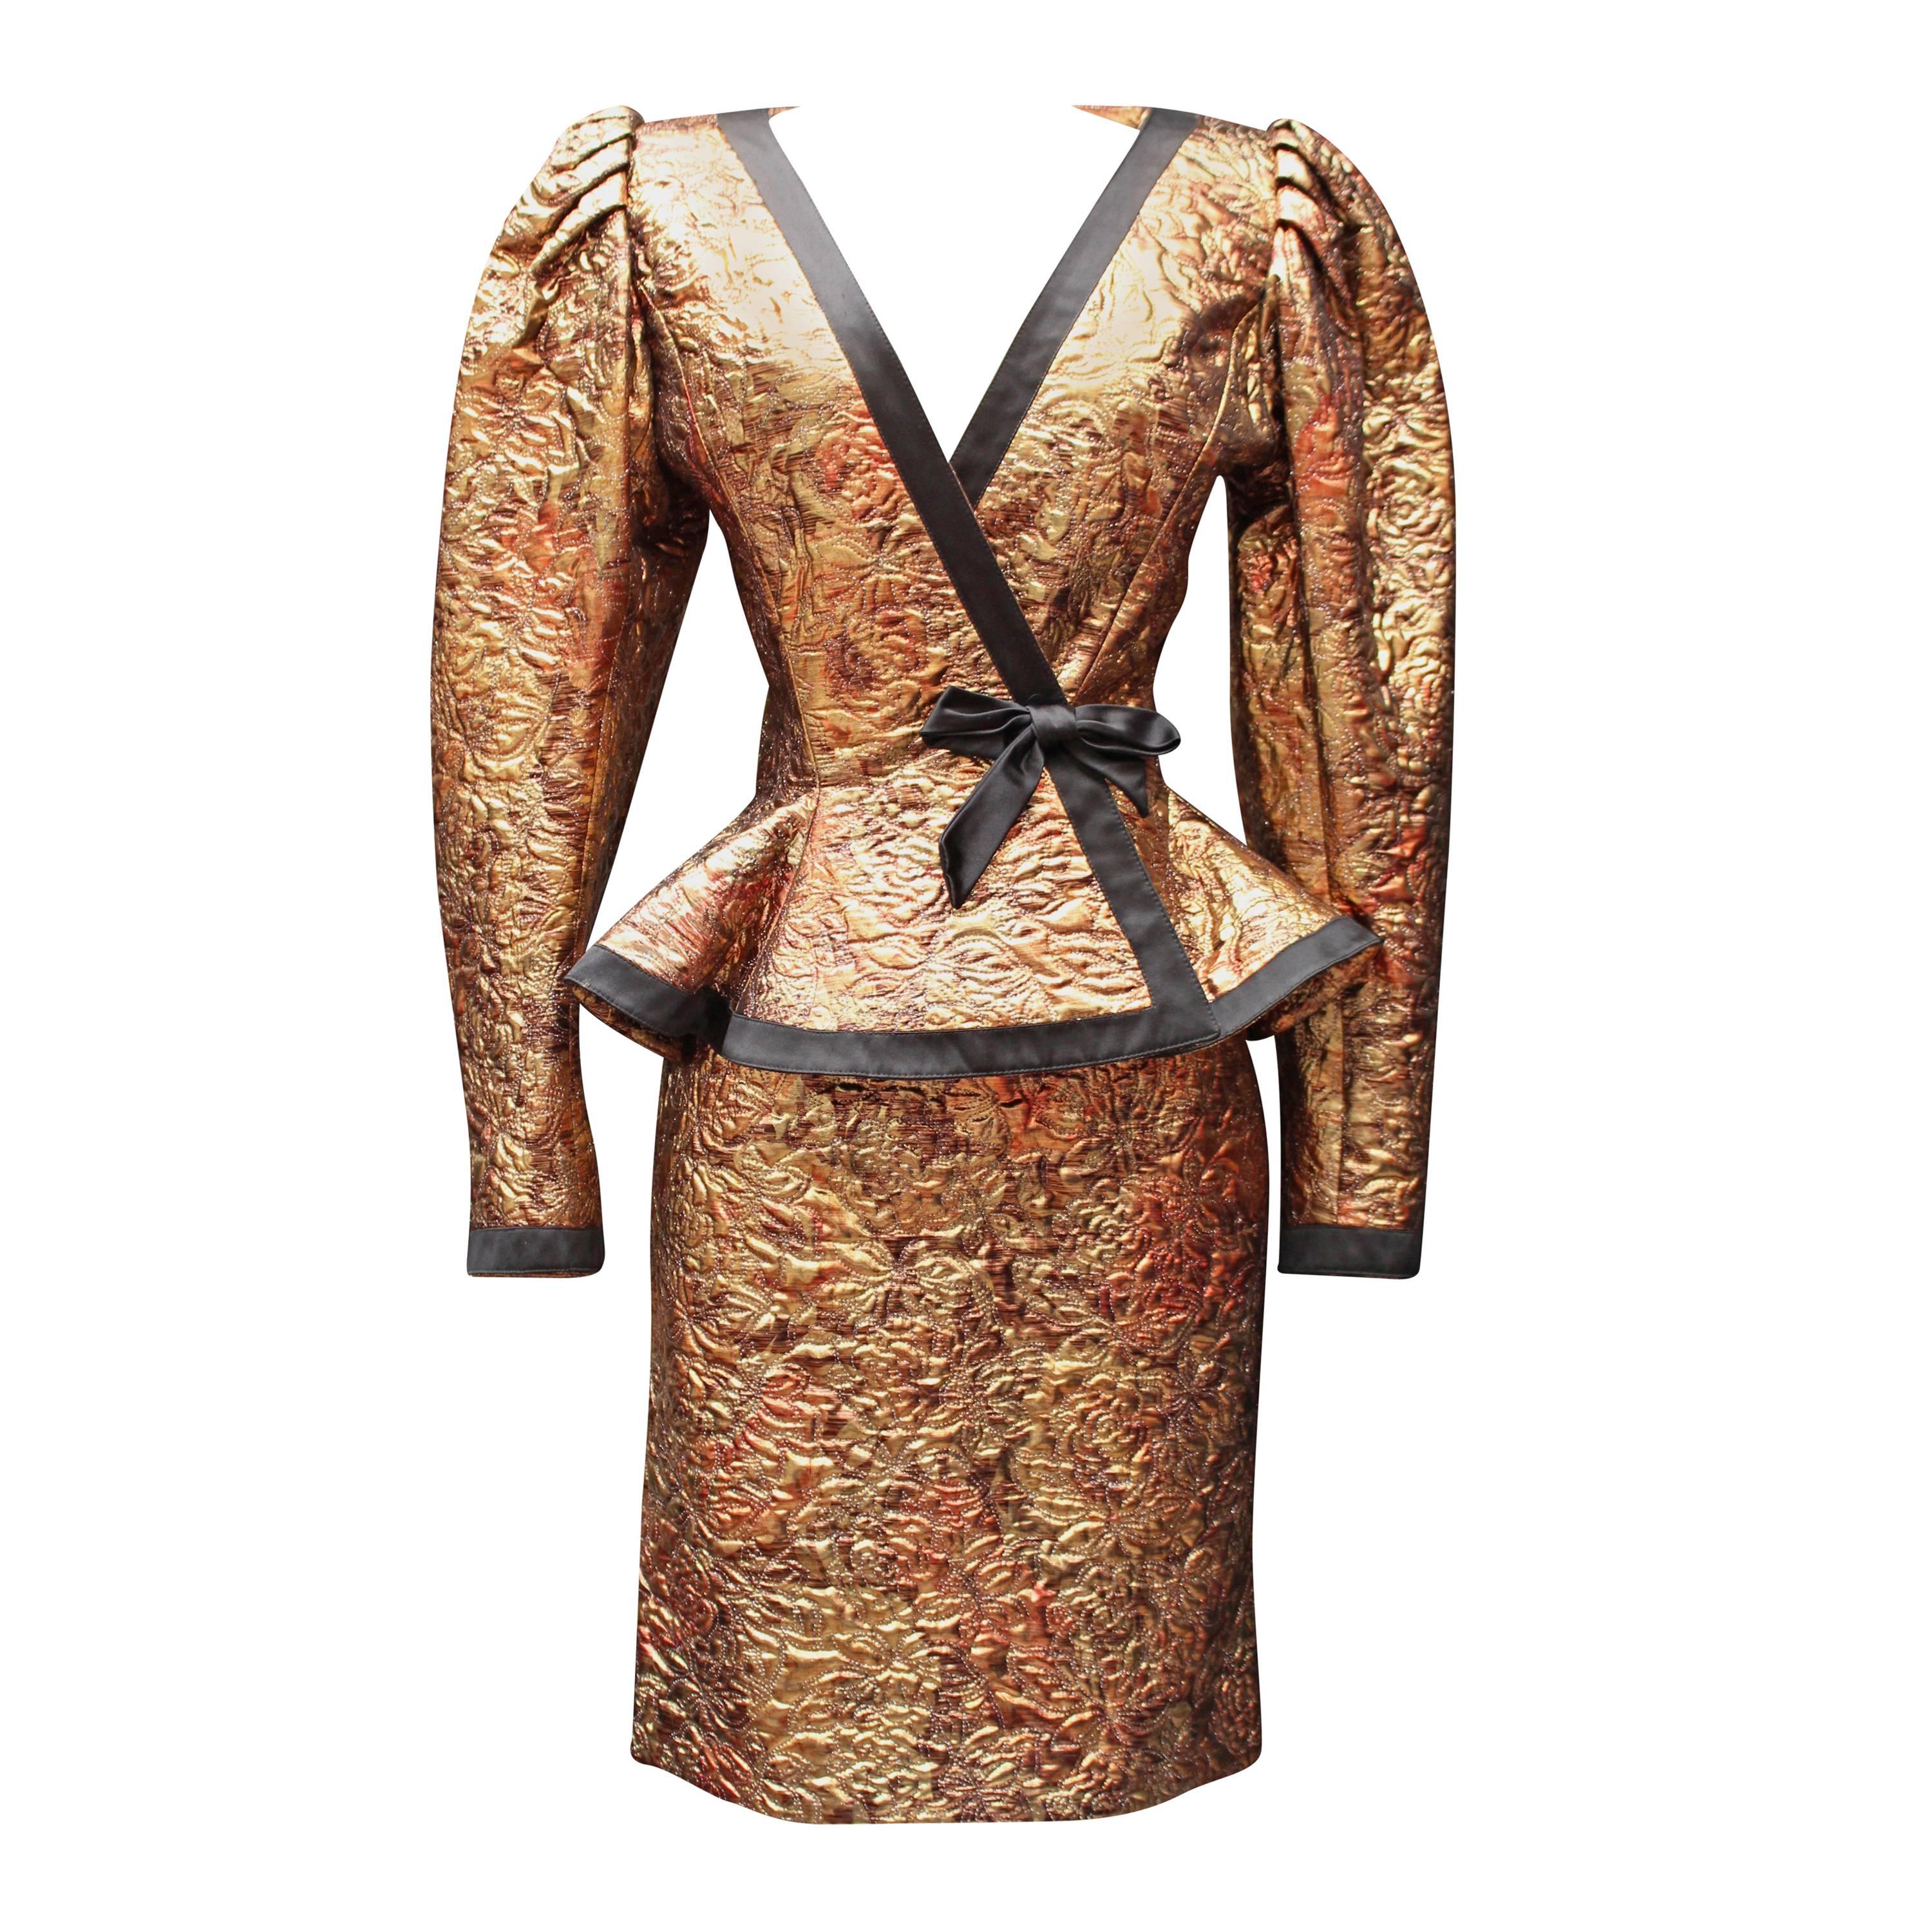 1980s Ungaro Copper and Gold Color Brocarde Jacket and Skirt Ensemble 